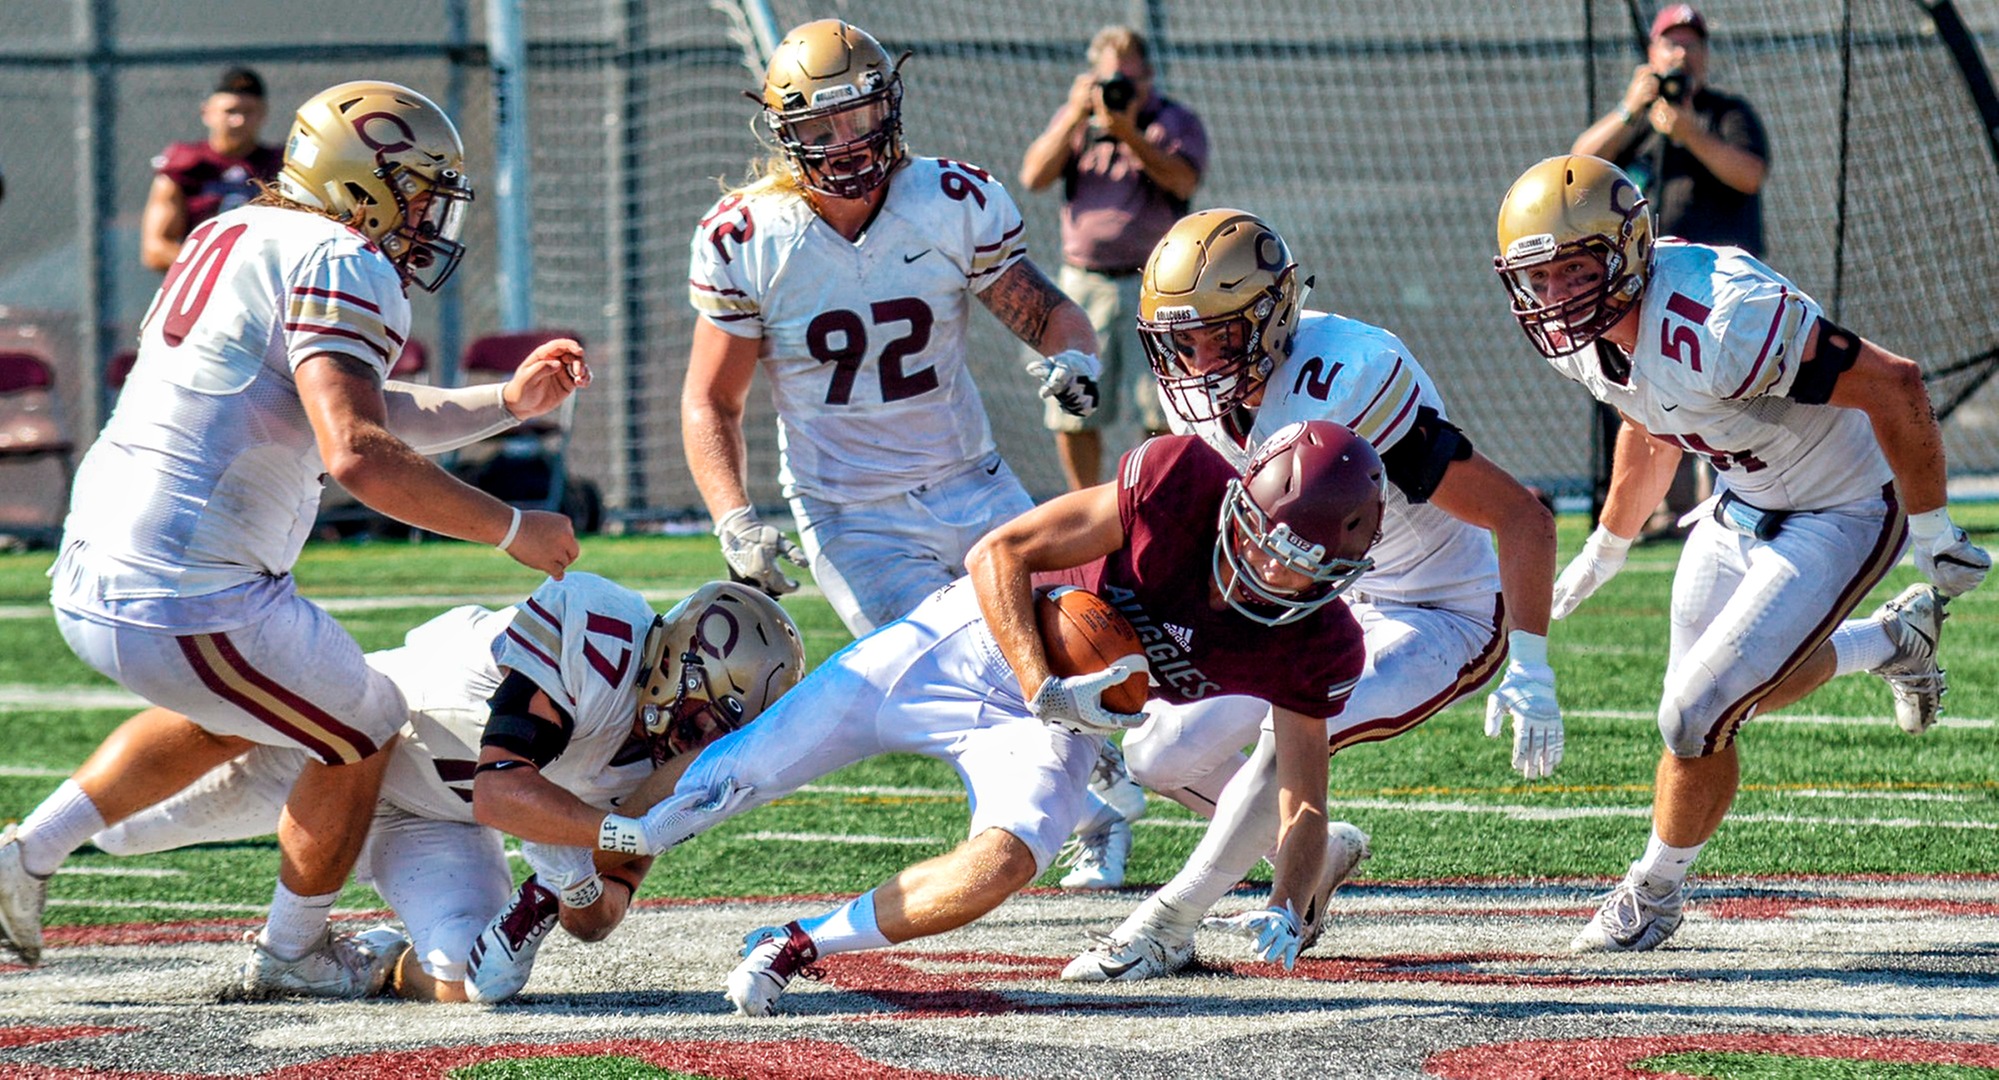 The Cobber defense swarms the Augsburg ball carrier during Concordia's 54-7 win. (Photo courtesy of BJ Pickard - MIAC Office)